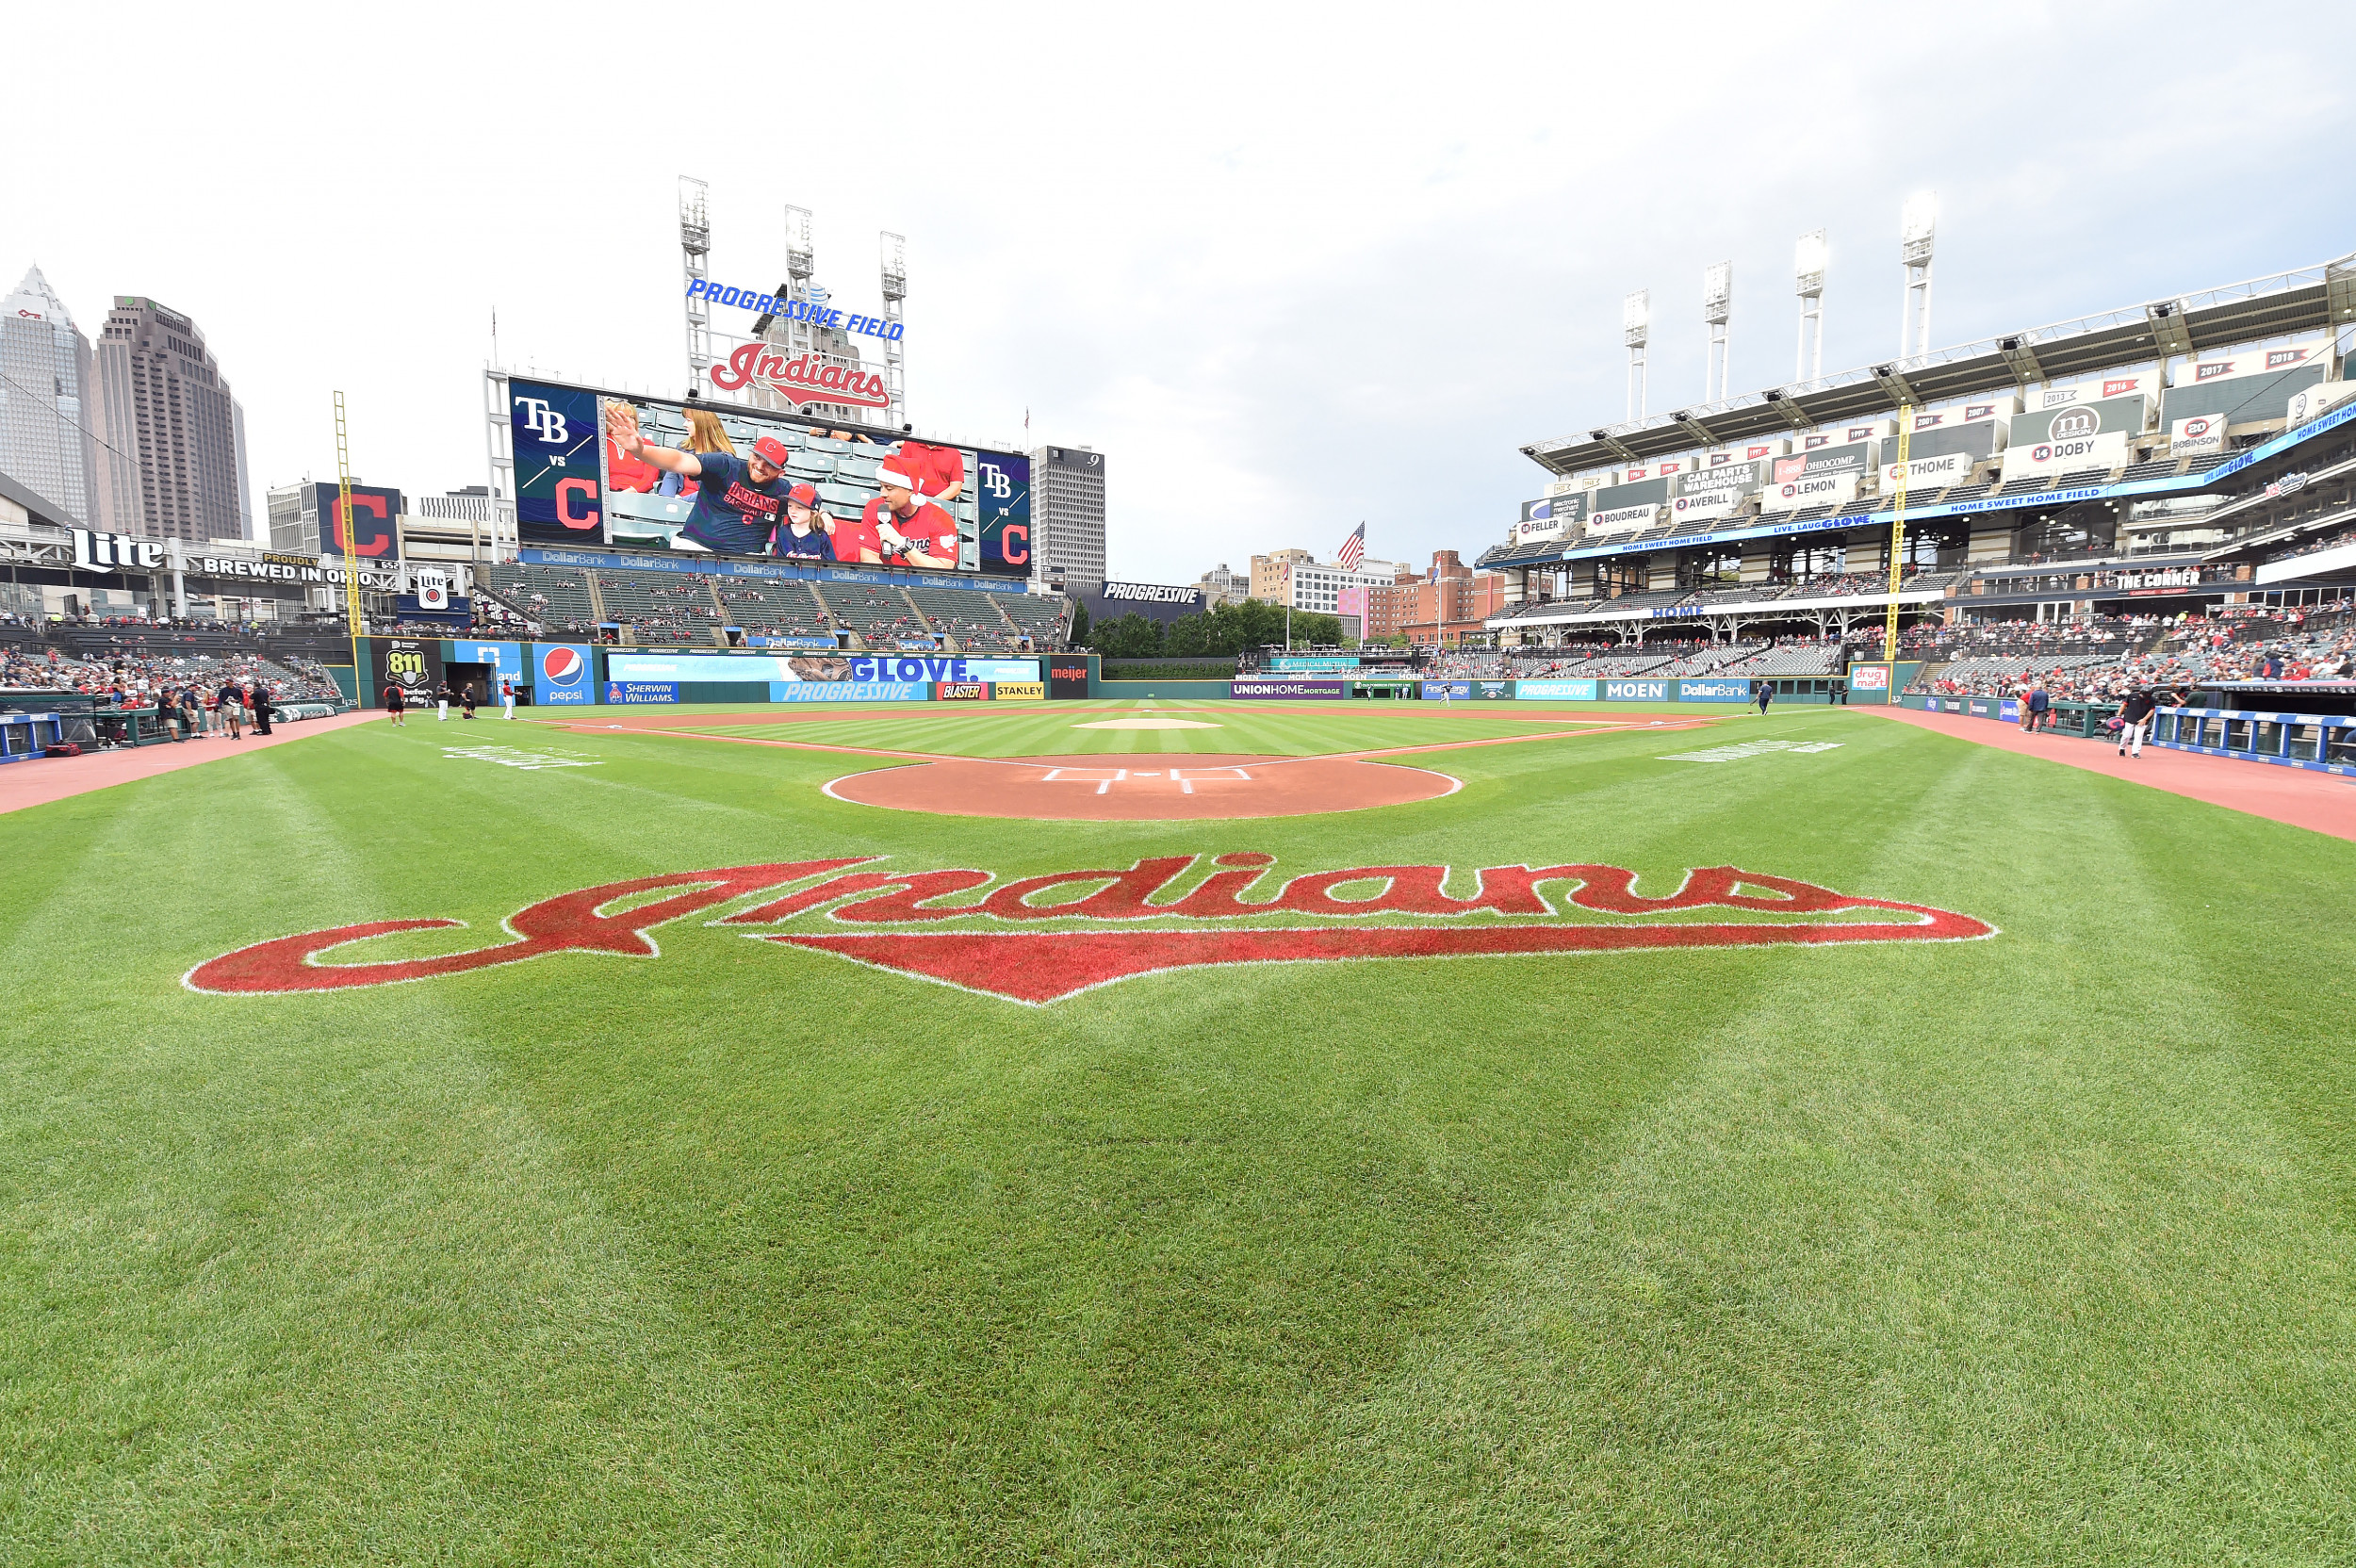 Some new suggestions to rename the Cleveland Indians: The week in baseball  